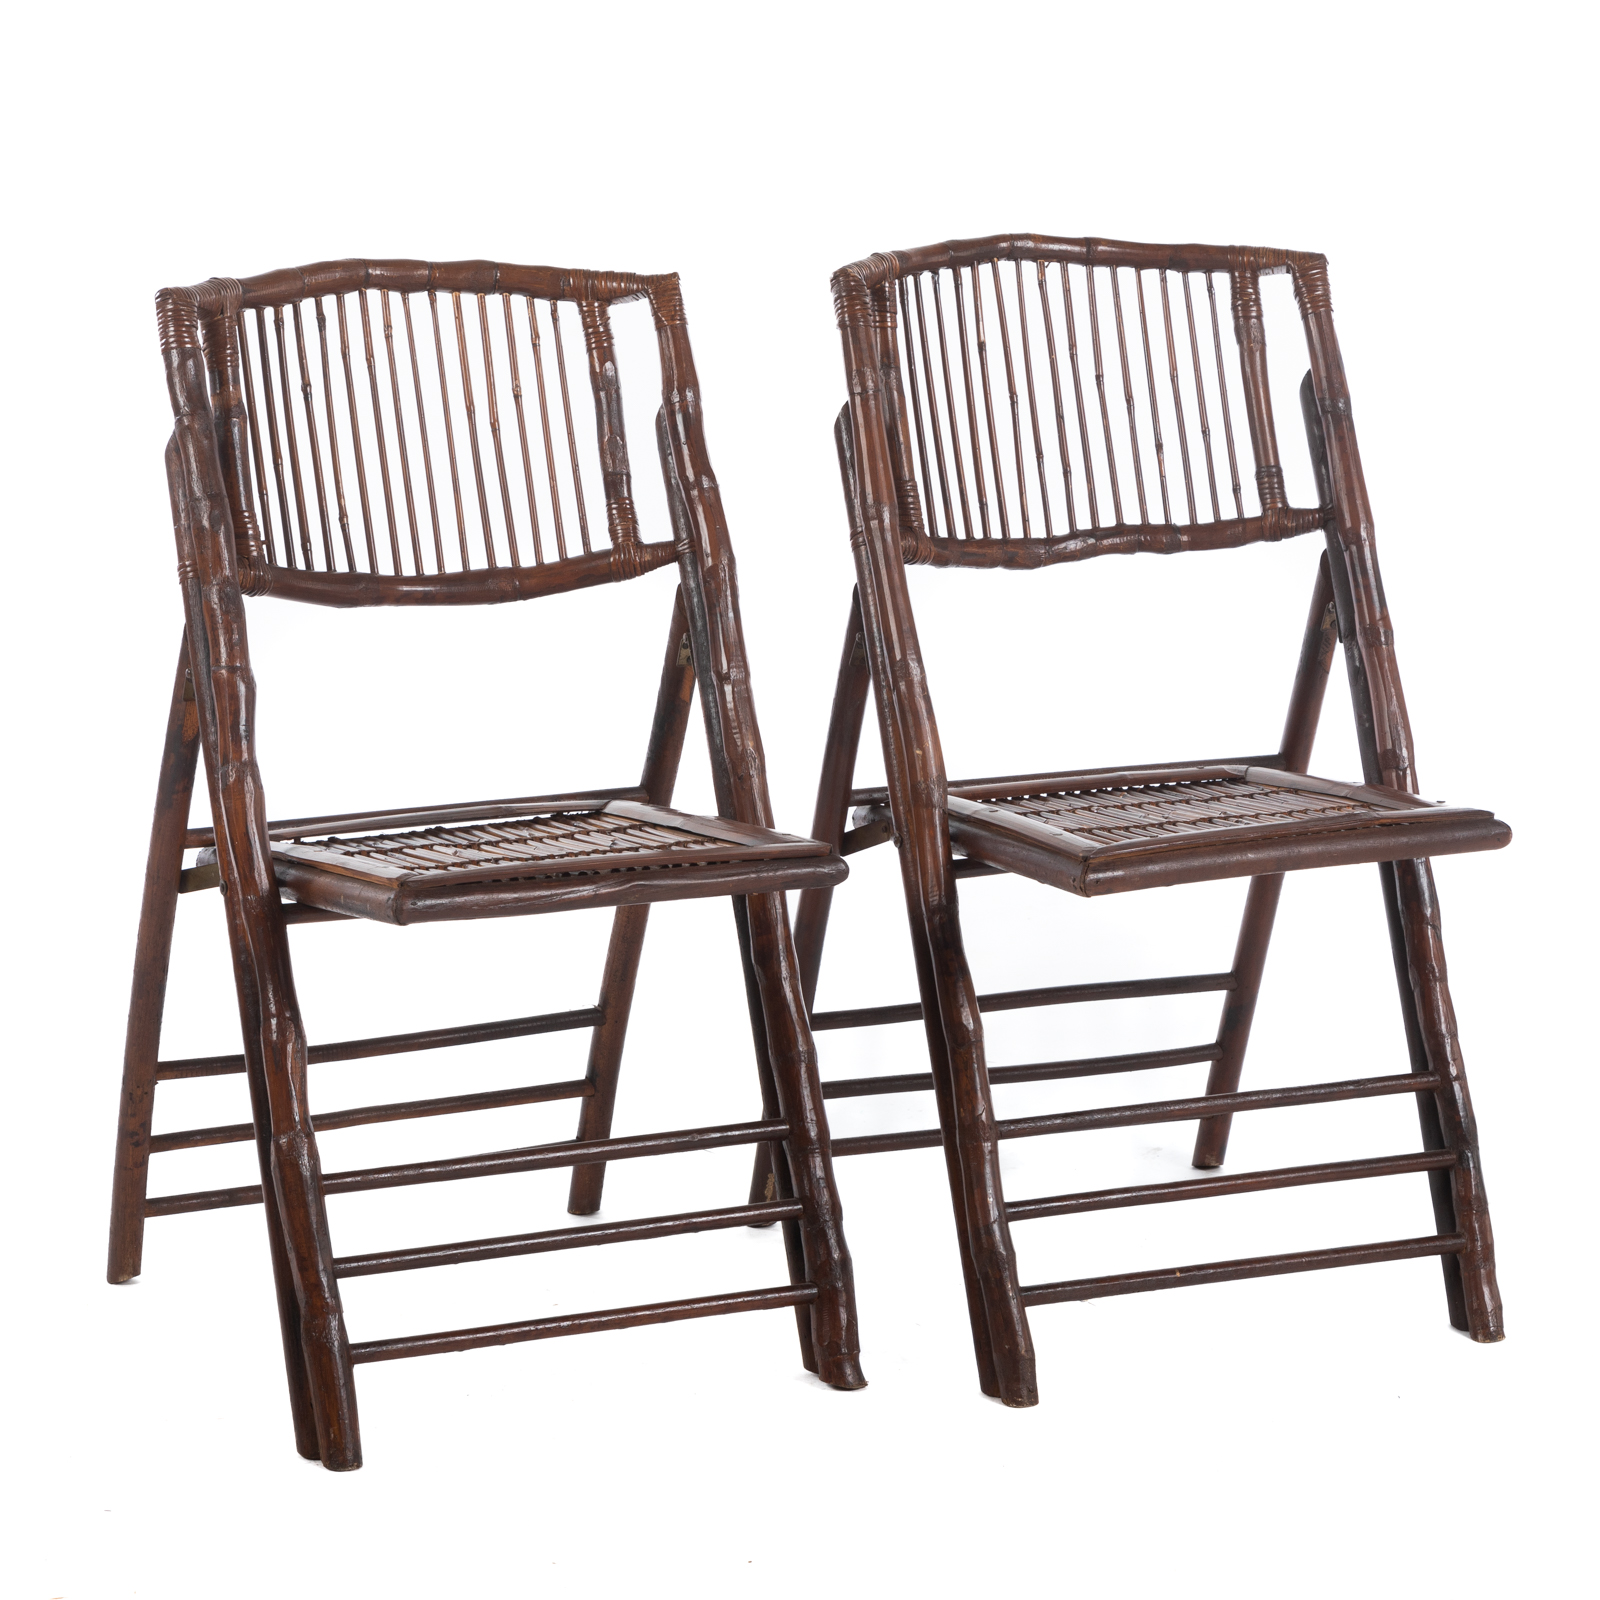 A PAIR OF FOLDING RATTAN CHAIRS 369810